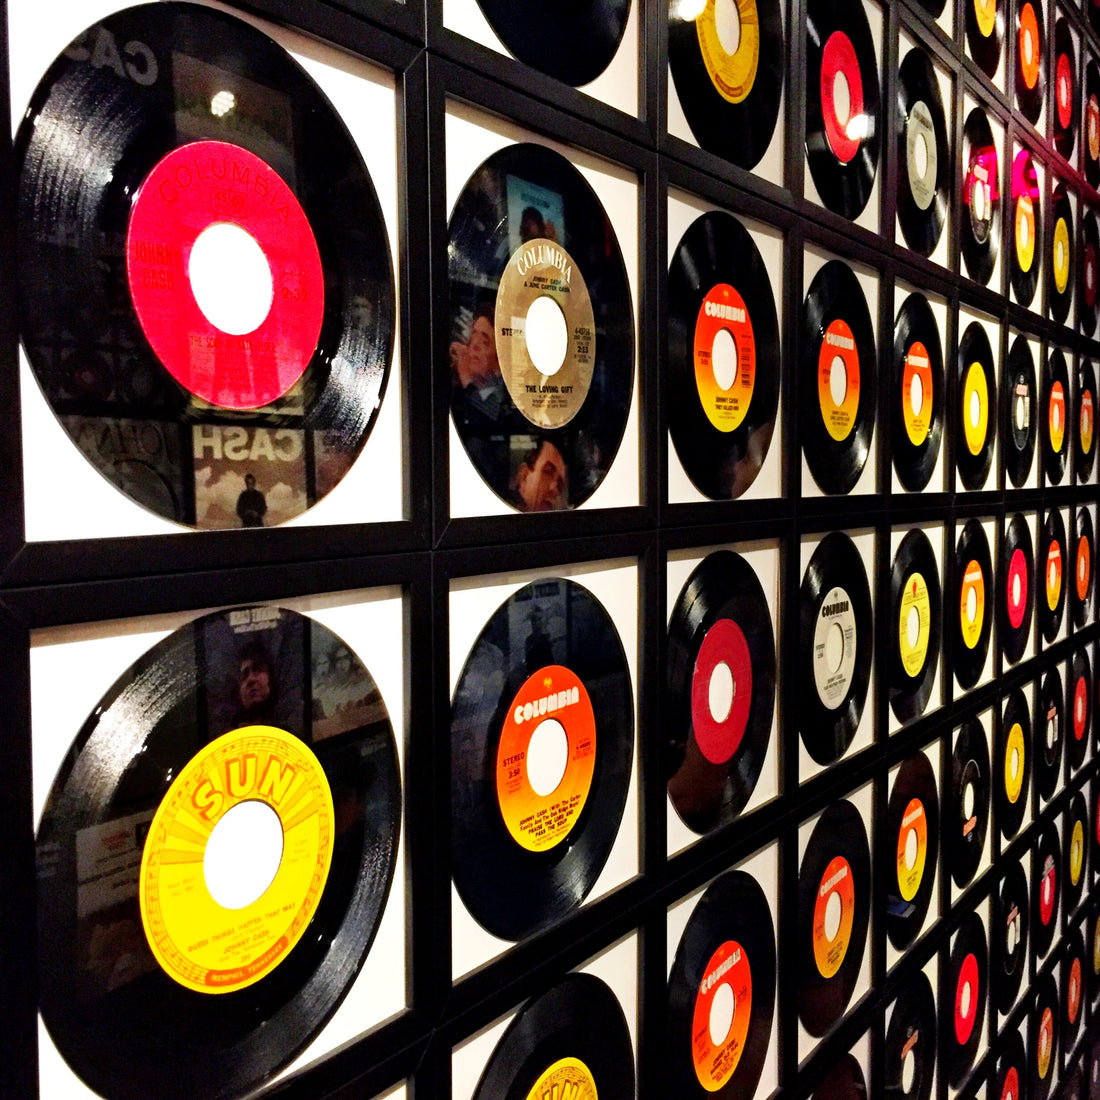 How to Uncover Collectible and Rare Vinyl Records